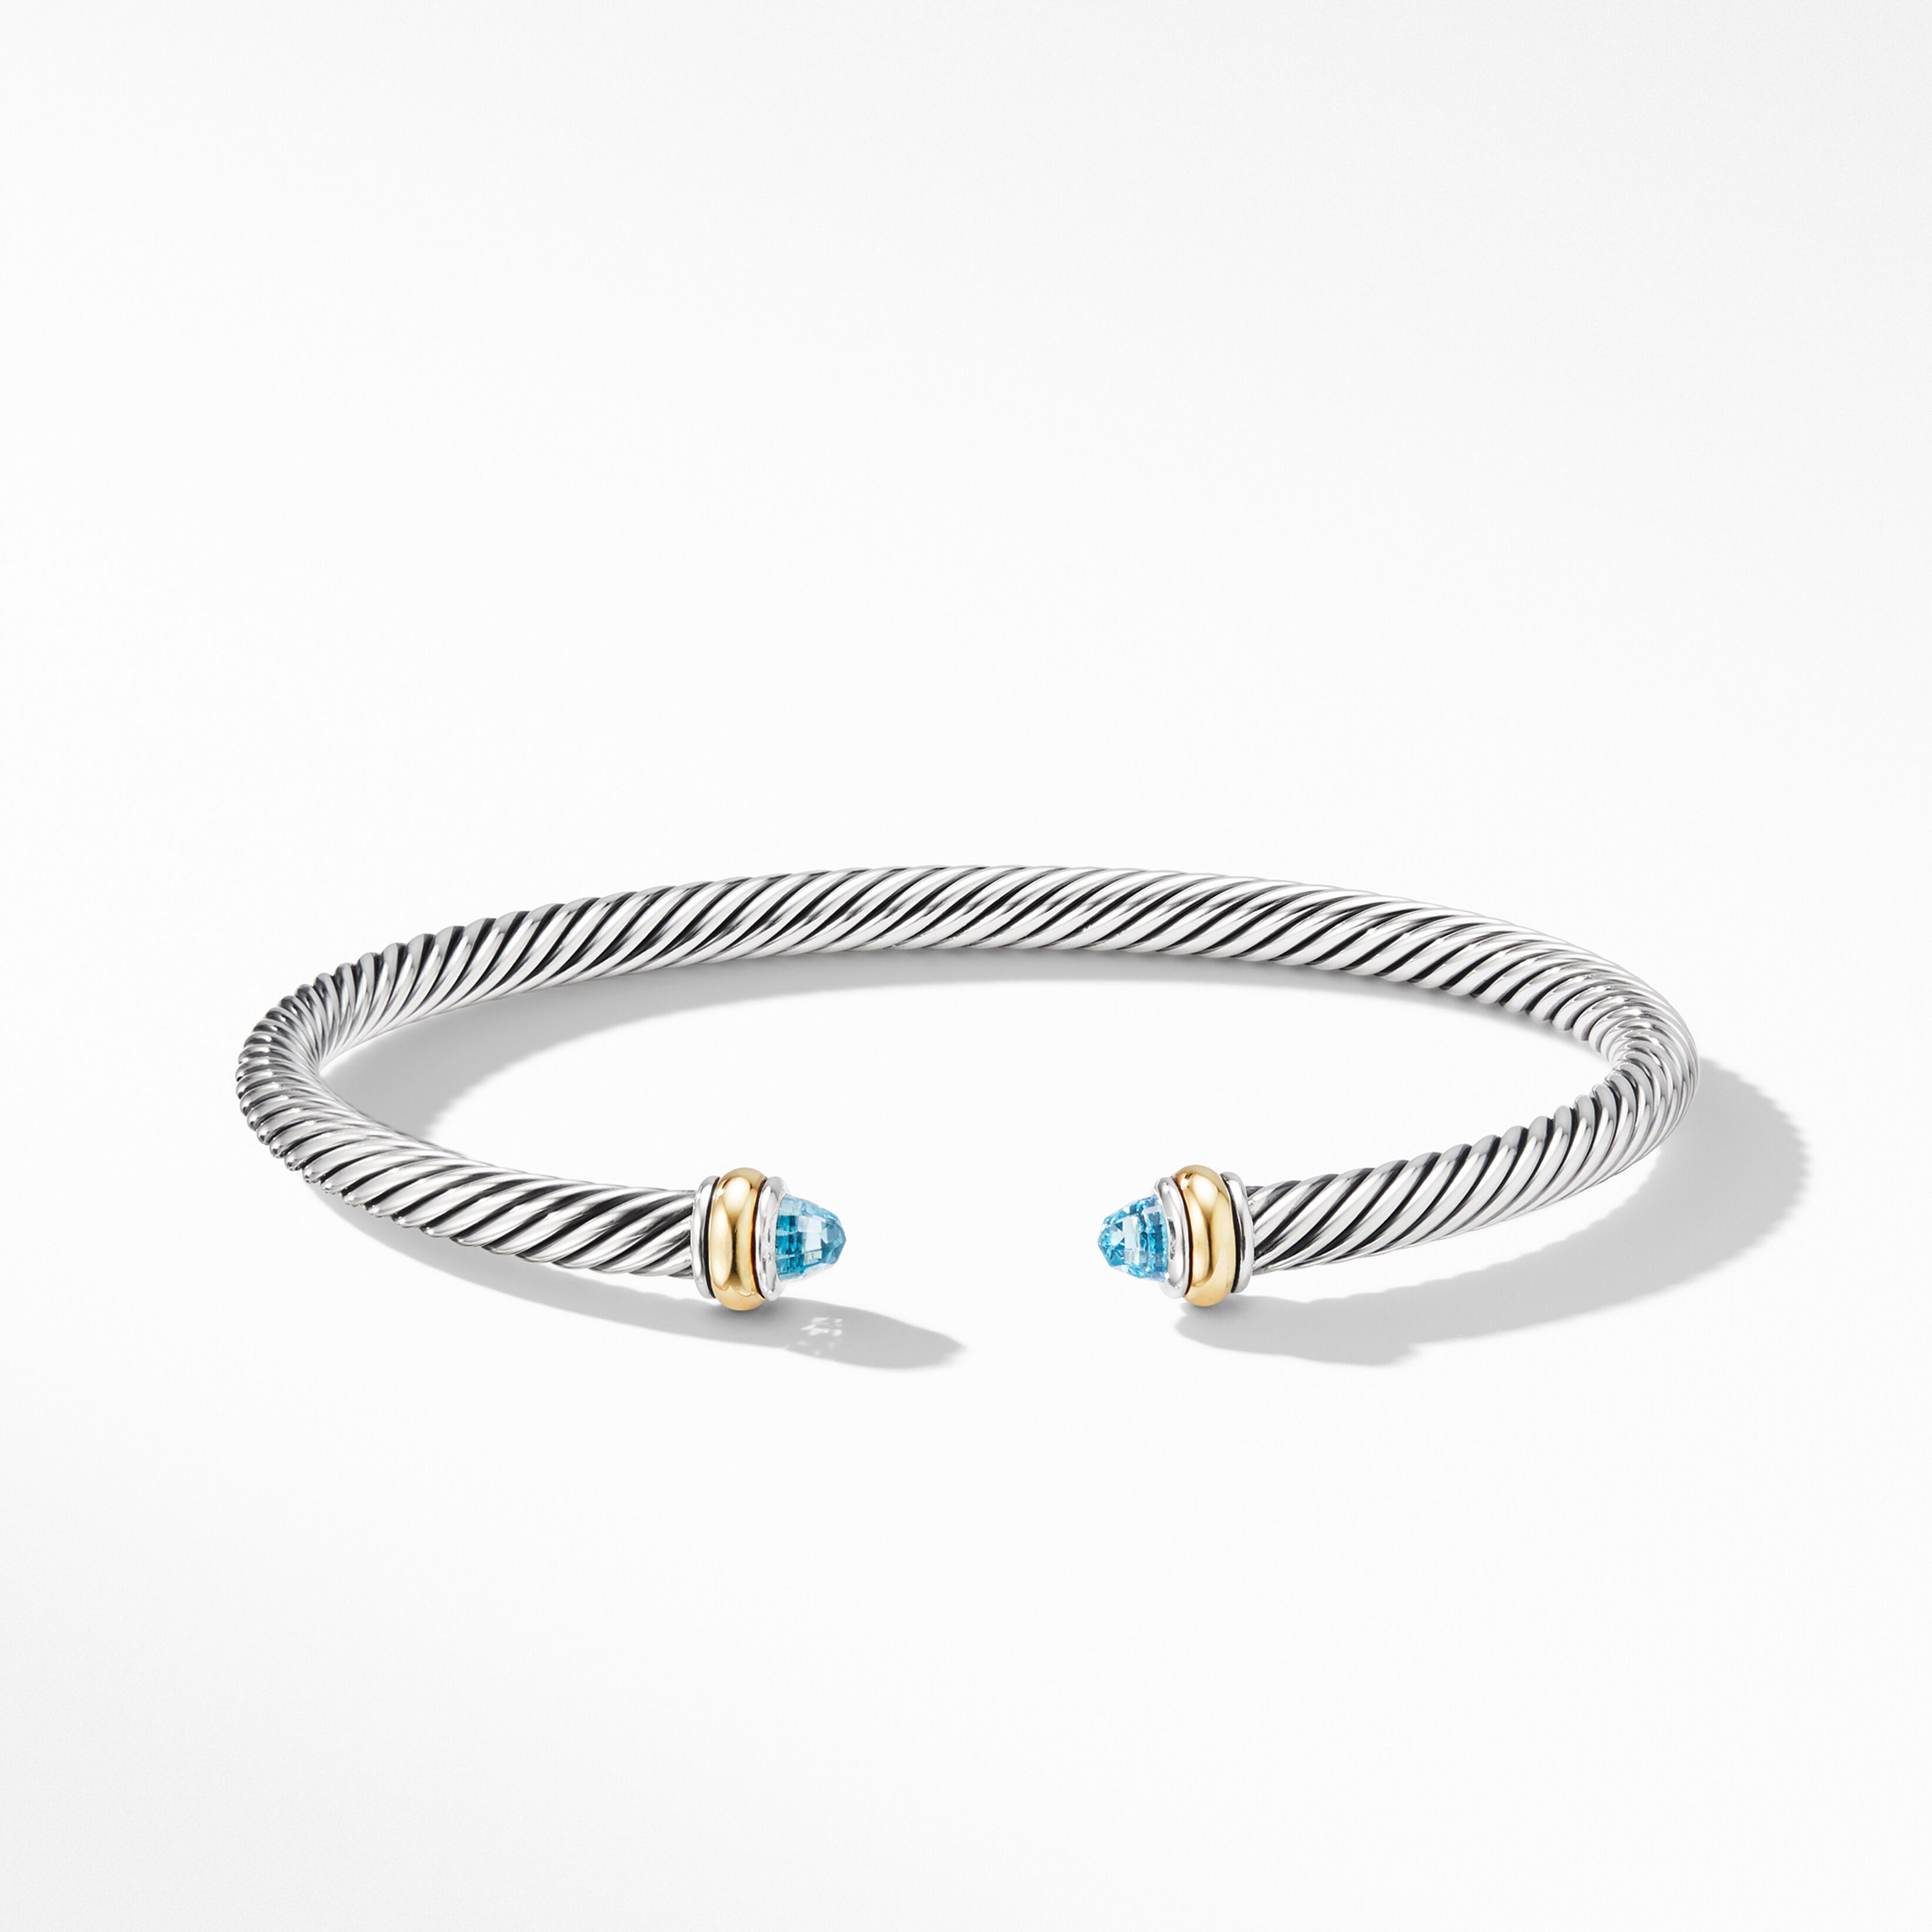 Cable Classics Bracelet in Sterling Silver with Blue Topaz and 18K Yellow Gold | David Yurman